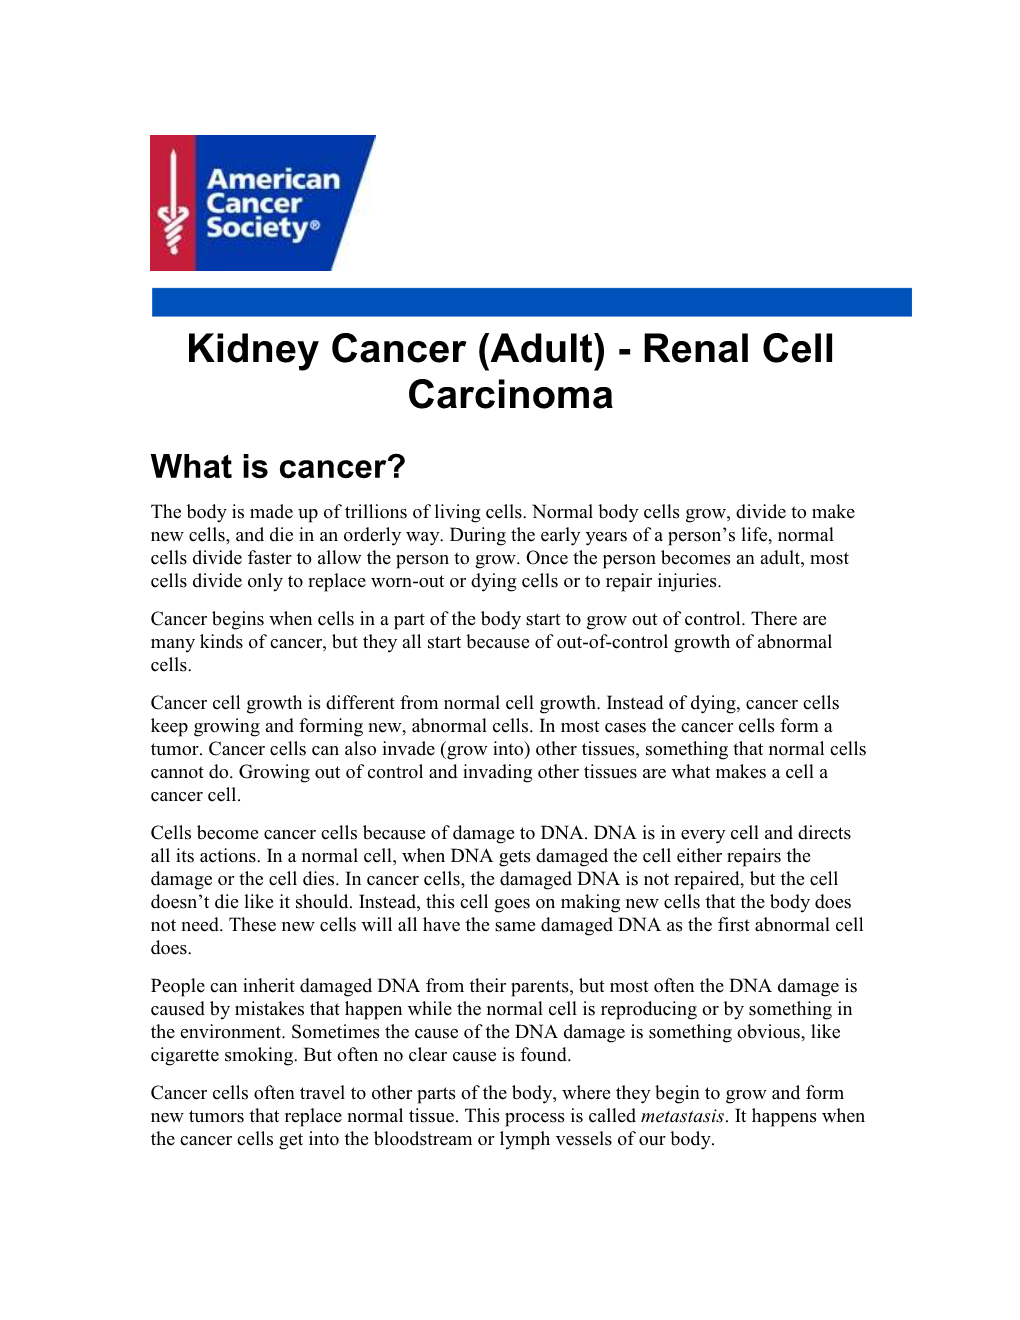 Kidney Cancer (Adult) - Renal Cell Carcinoma